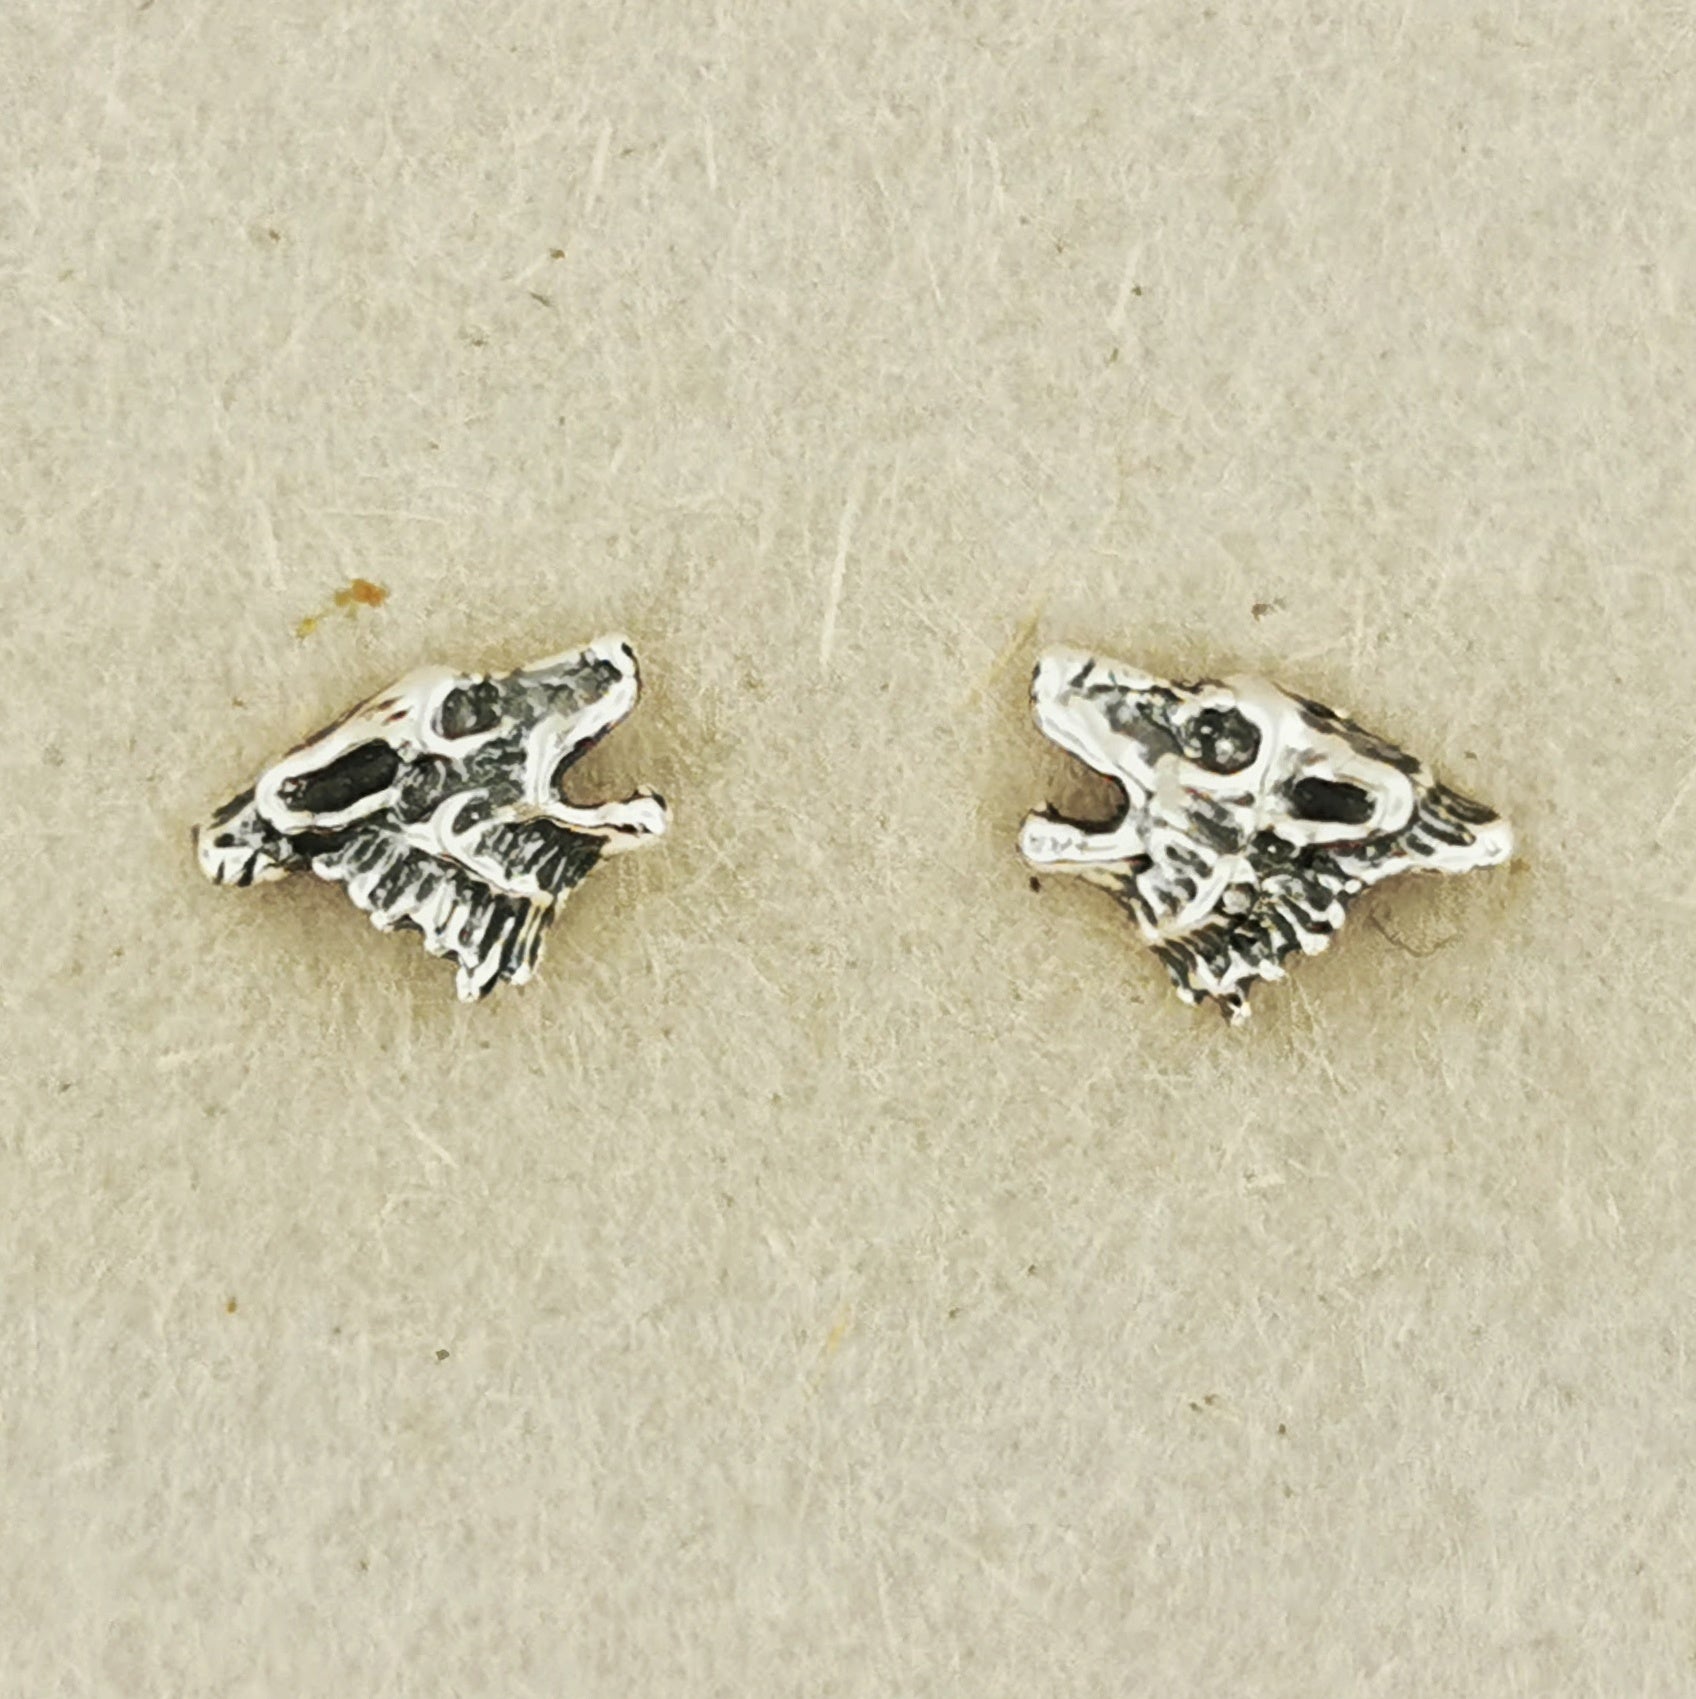 Howling Wolves Sterling Silver Earrings, Silver Wolf Earrings, Small Silver Wolf Earrings, Wolf Howling Earrings, Small Wolf Totem Earrings In Silver, Silver Wollf Stud Earrings, 925 Silver Wolf Earrings, Howl At The Moon Earrings